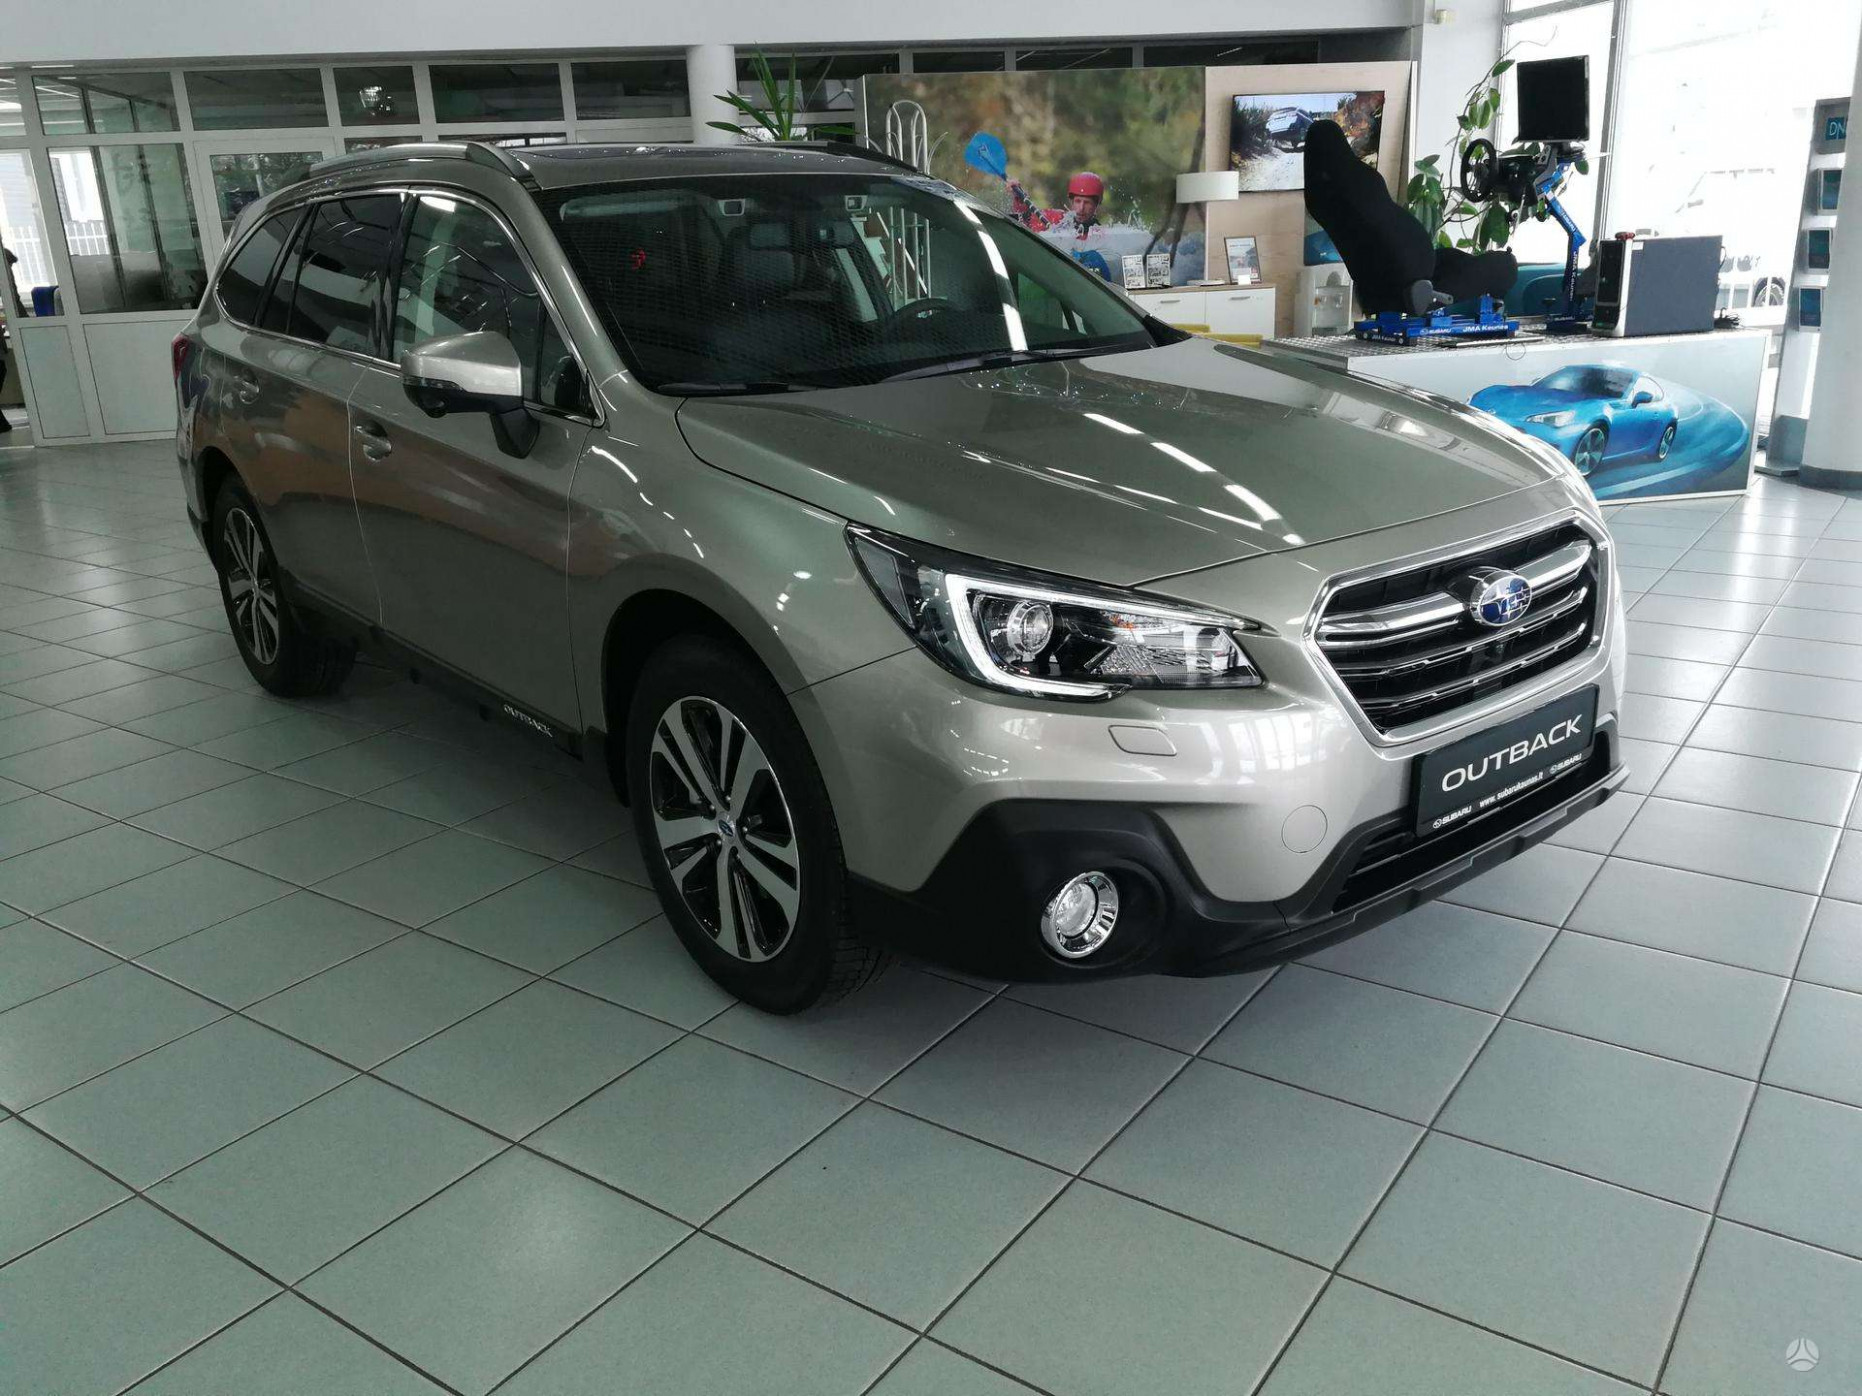 Performance and New Engine 2022 Subaru Outback Price